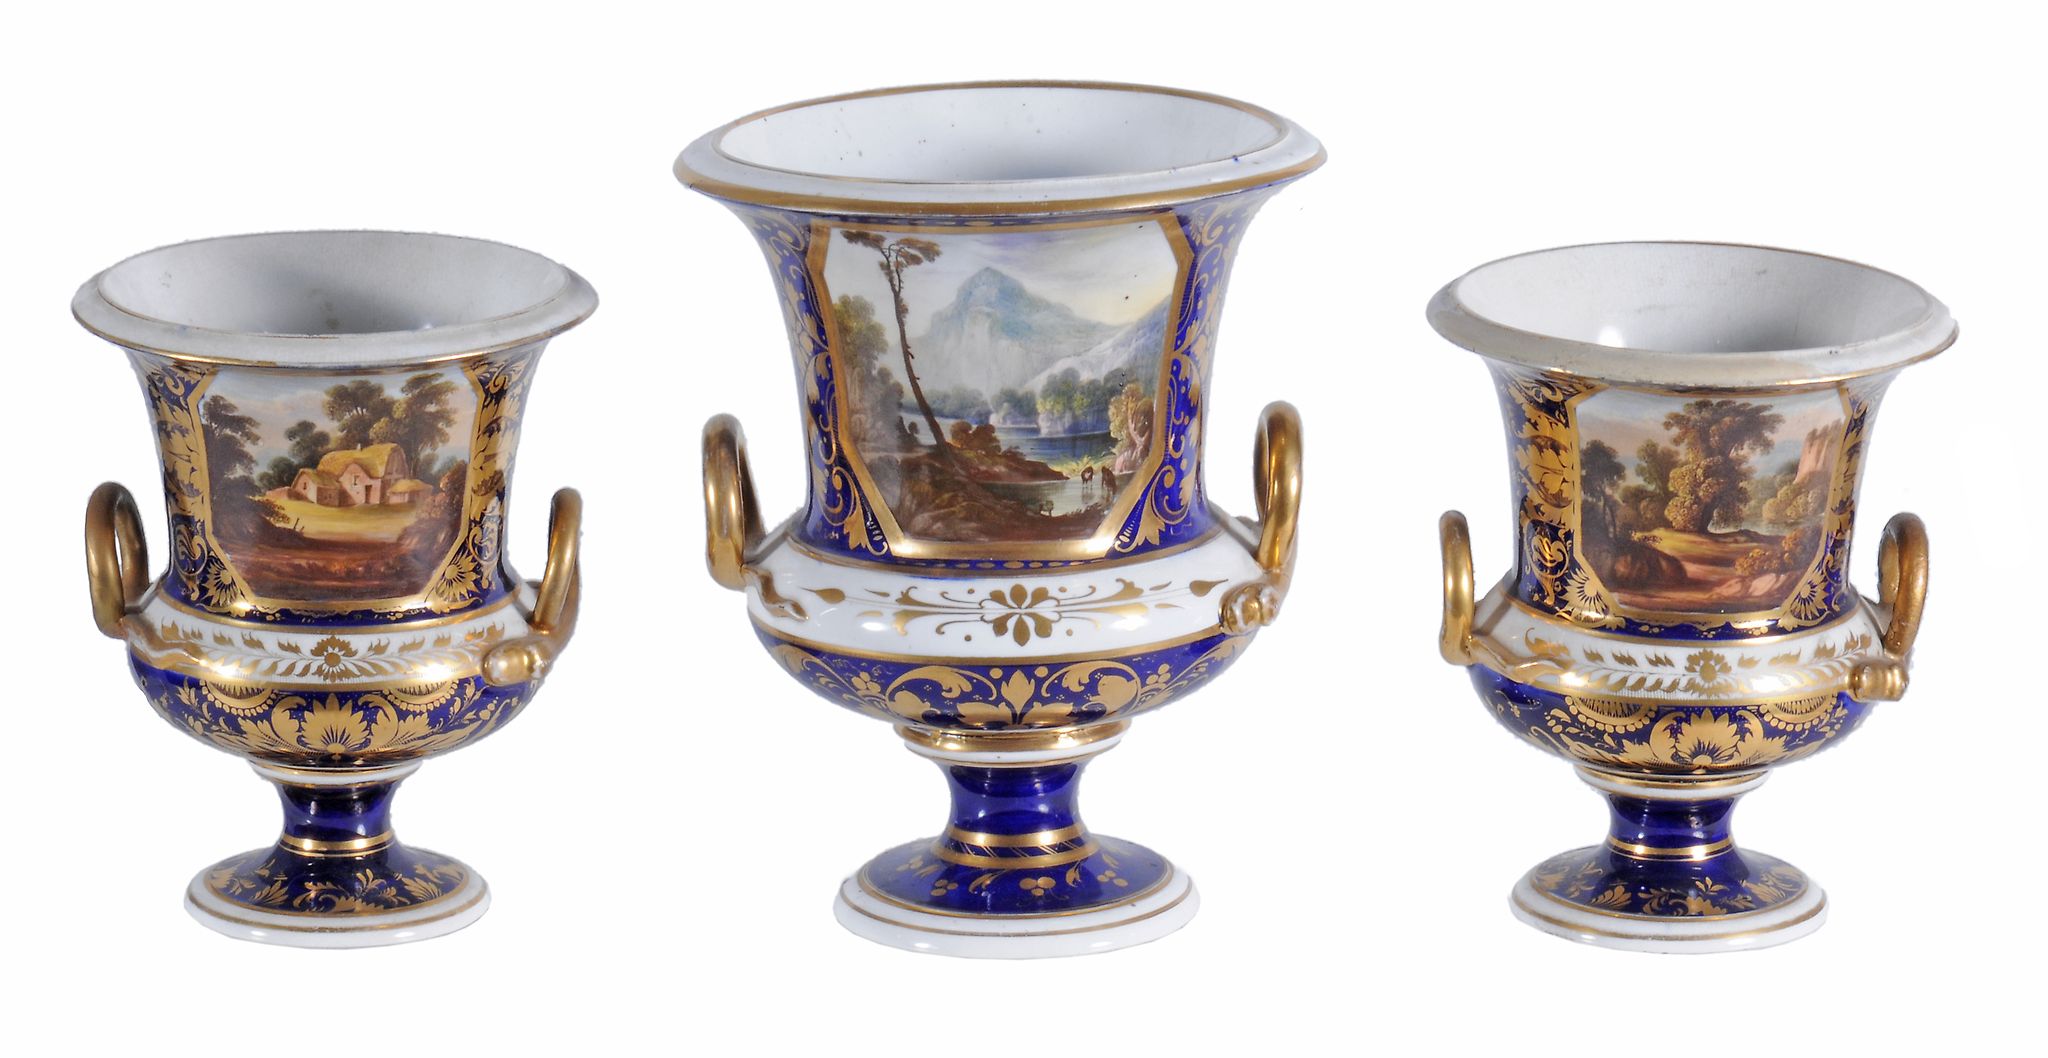 A Derby (Rbt. Bloor) blue-ground and gilt campana urn  , circa 1820, painted with a titled